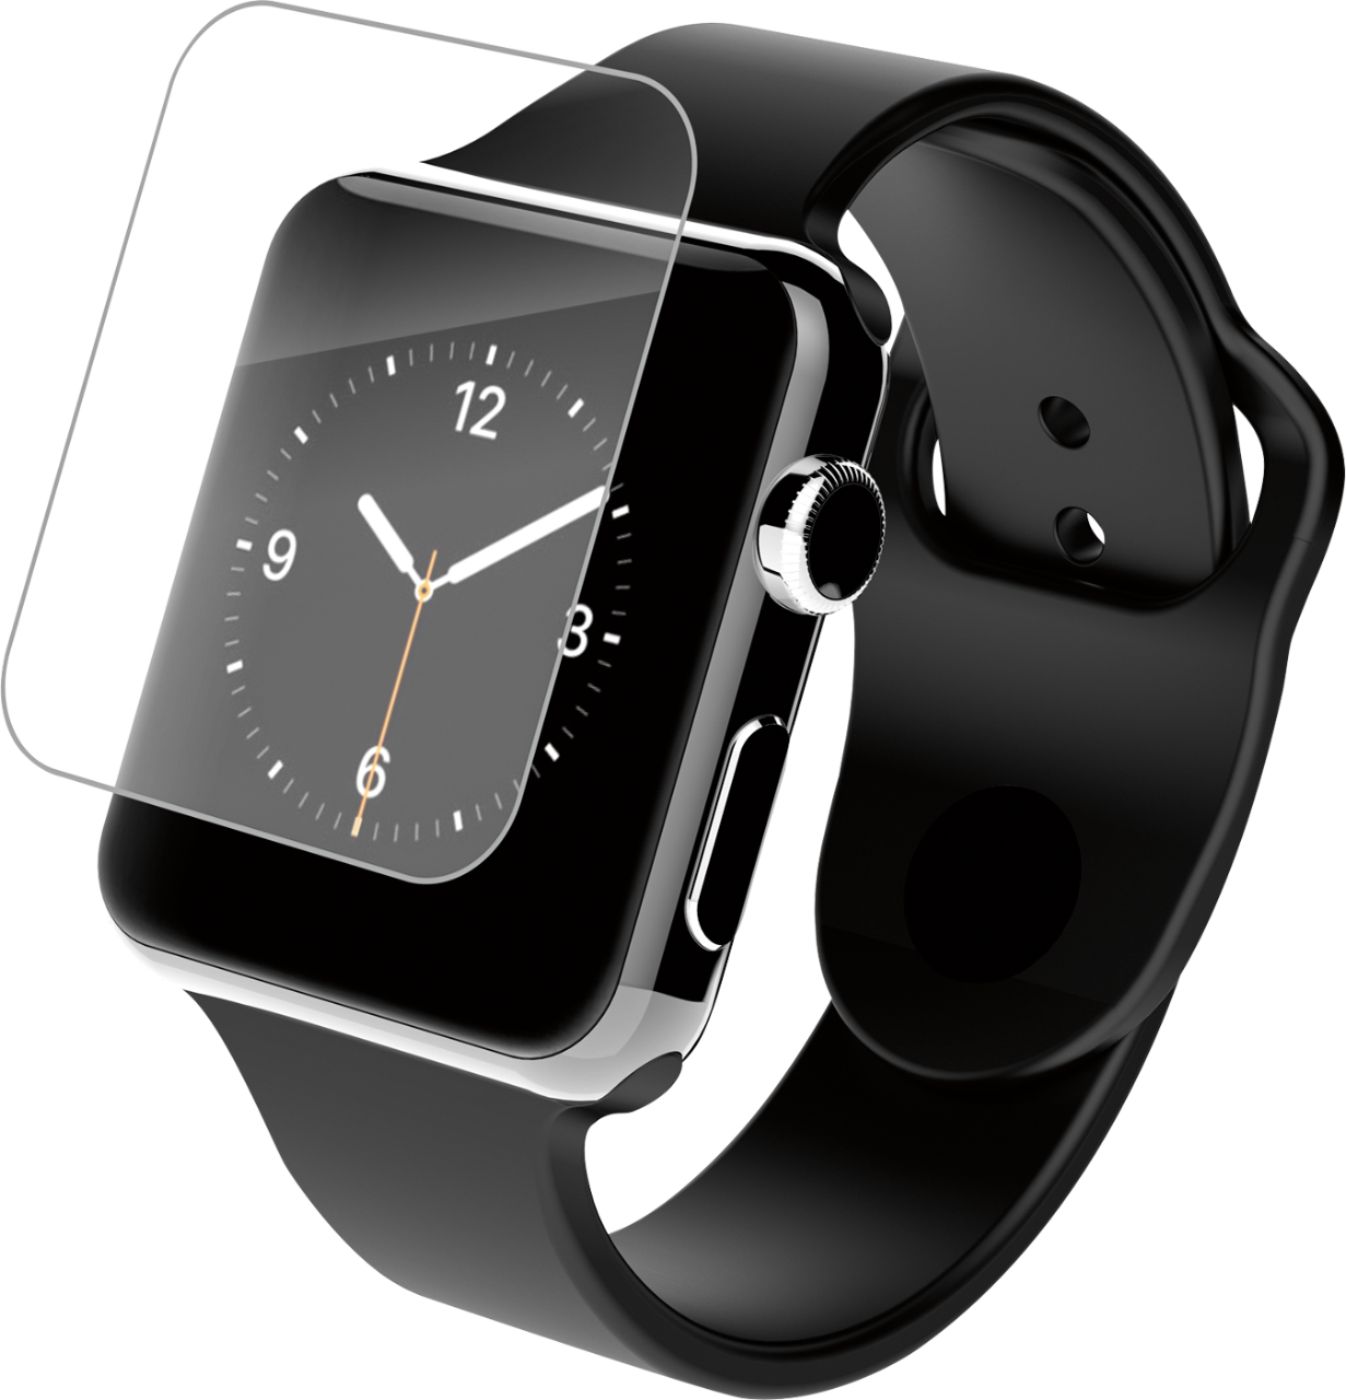 ZAGG InvisibleShield Ultra Clear Screen Protector for Apple Watch